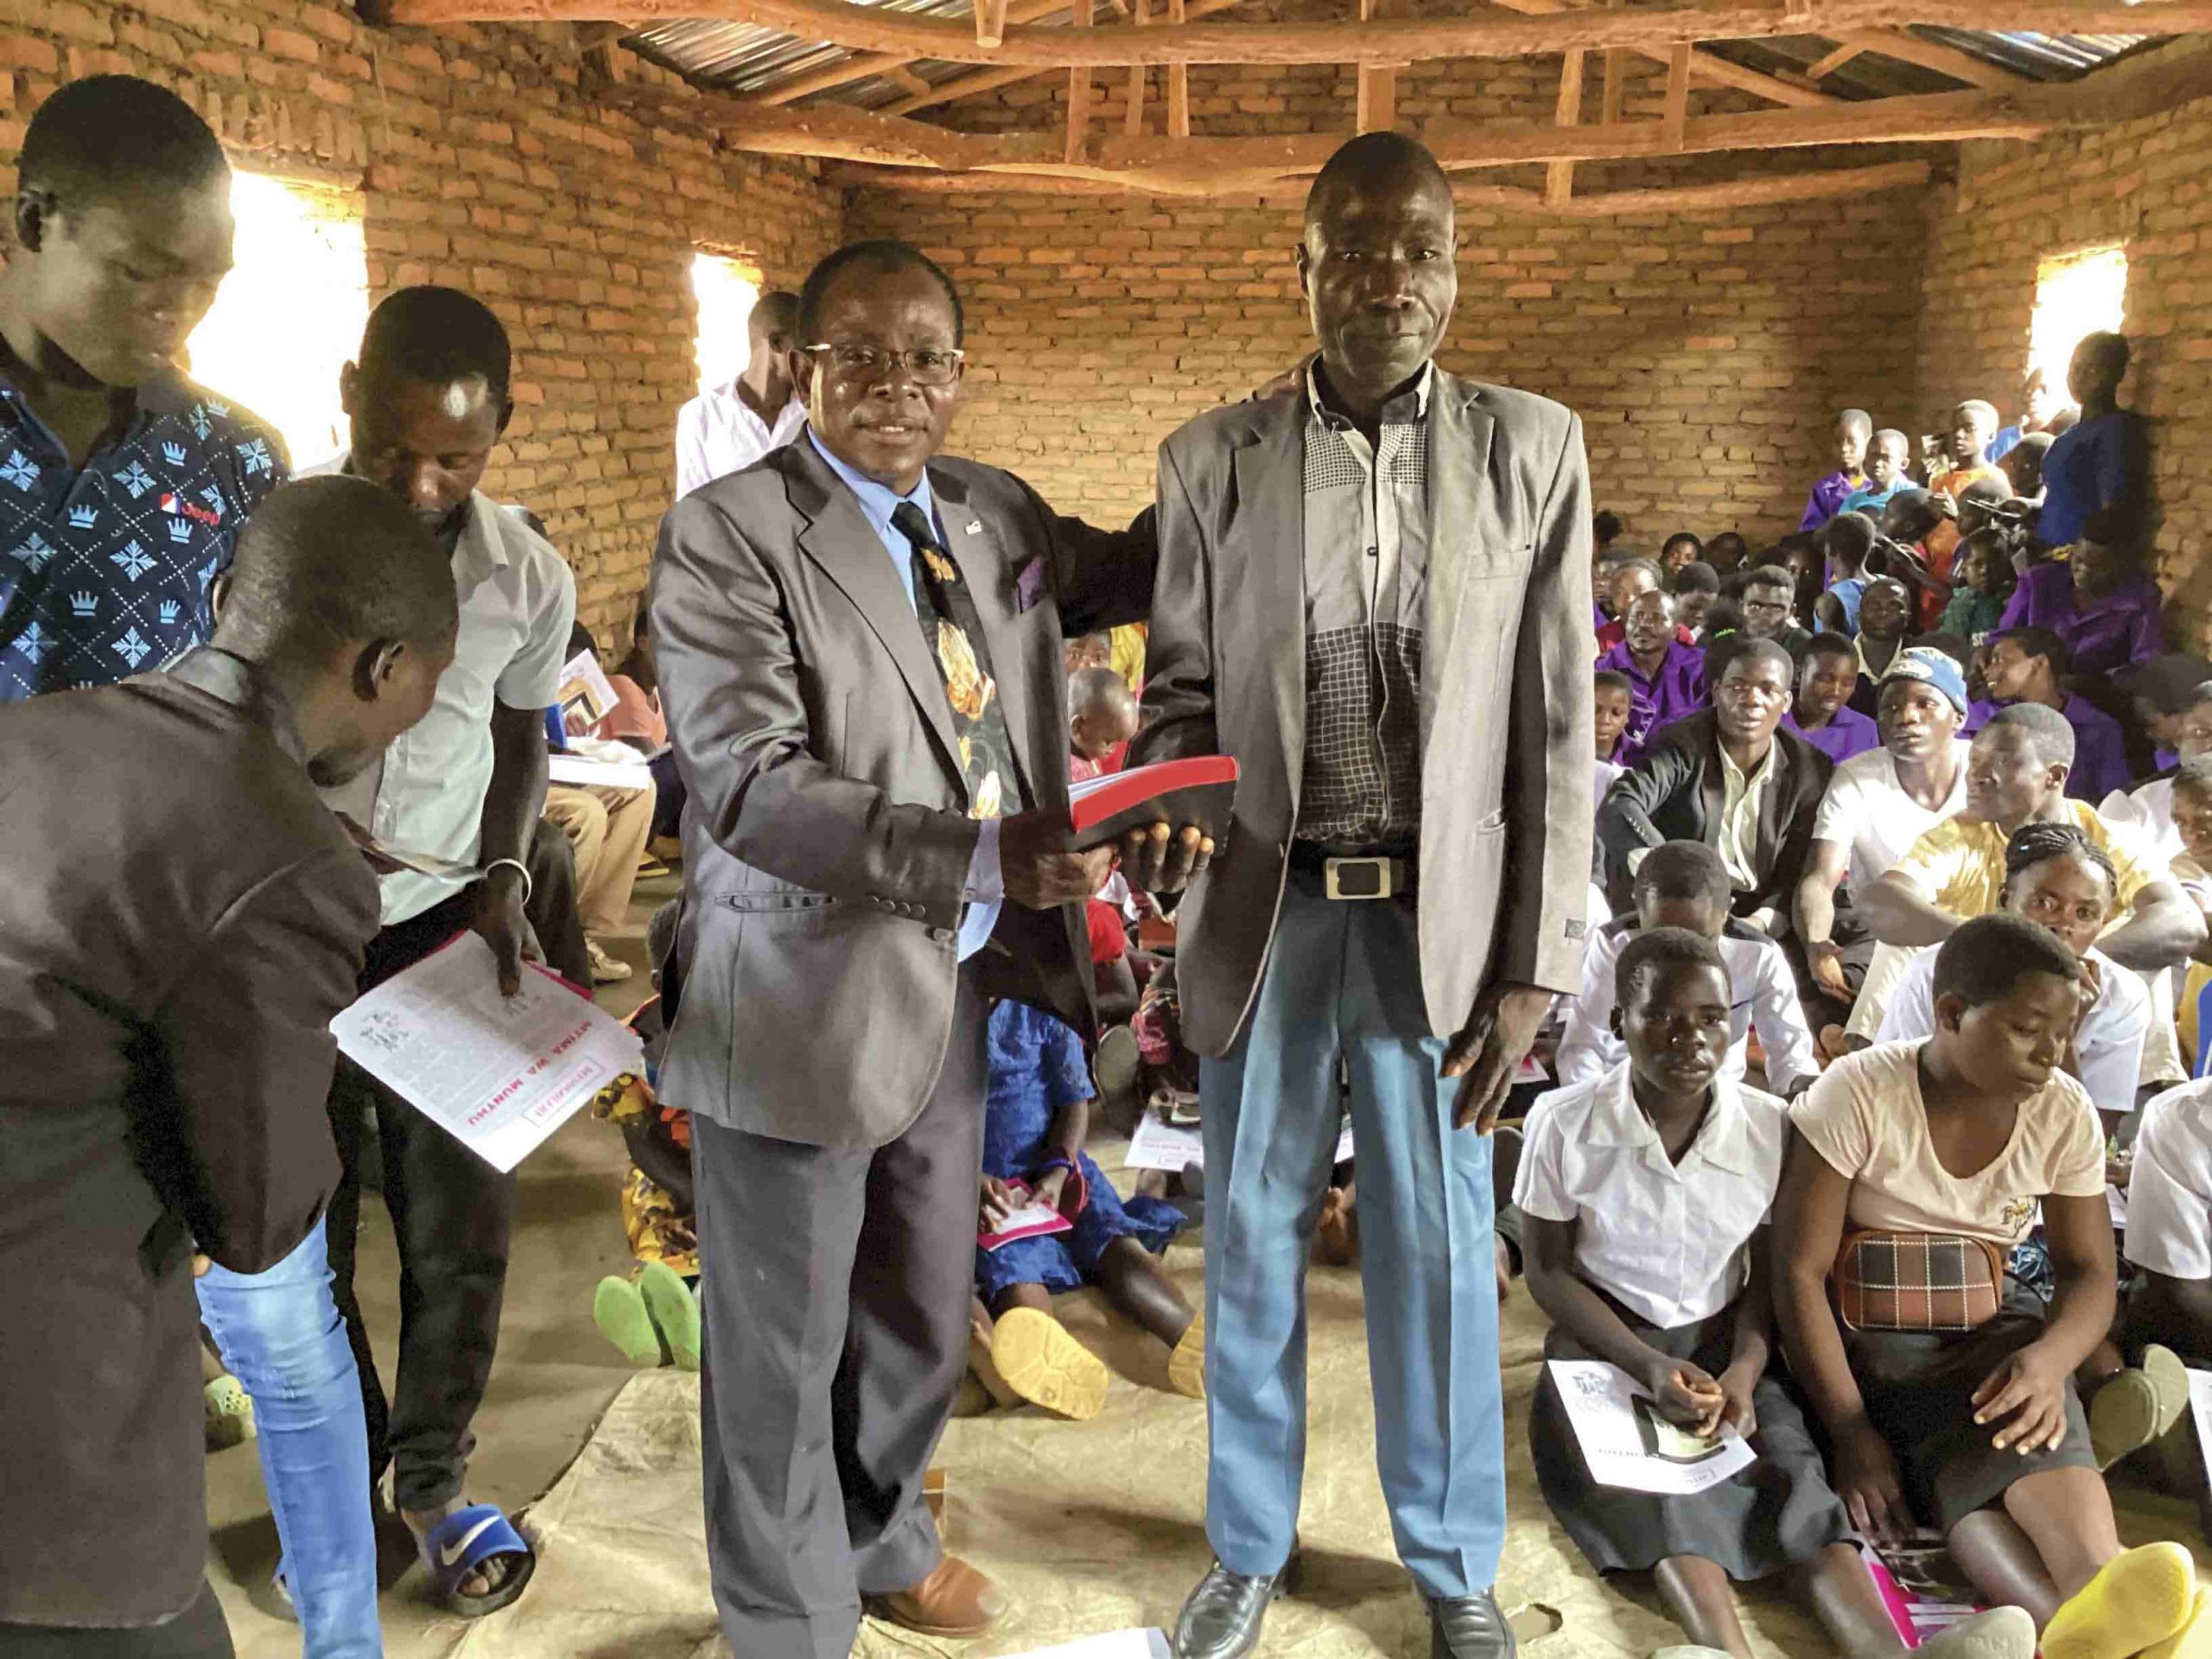 A Christian pastor in Malawi handing a Bible to a member of his church while in their church building